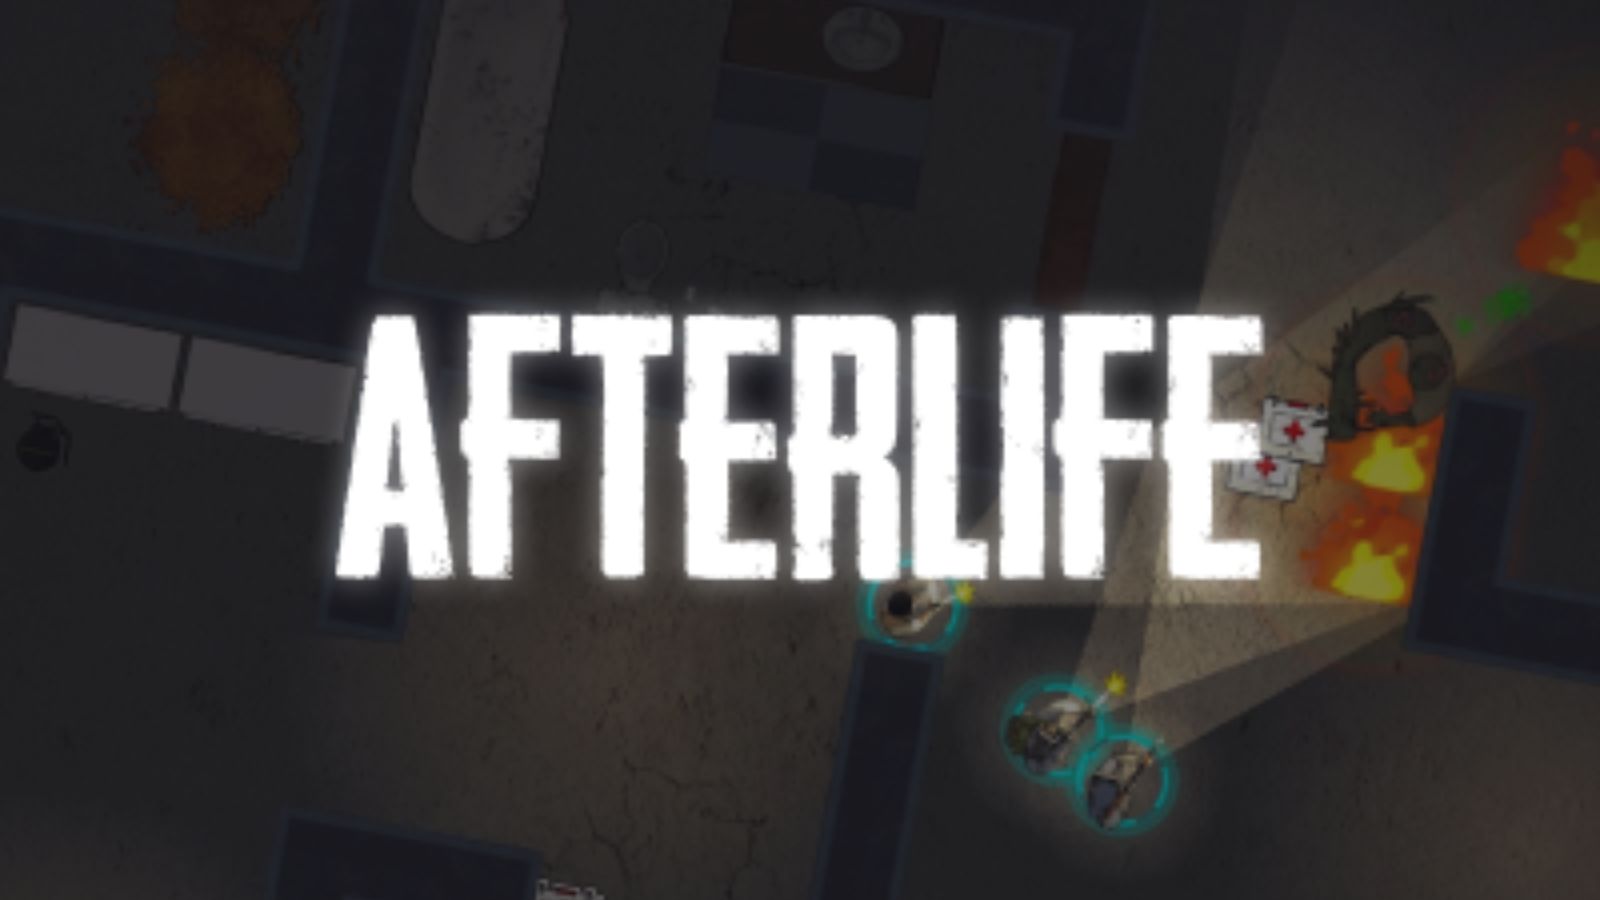 Afterlife start screen depicting the logo in large white letters.